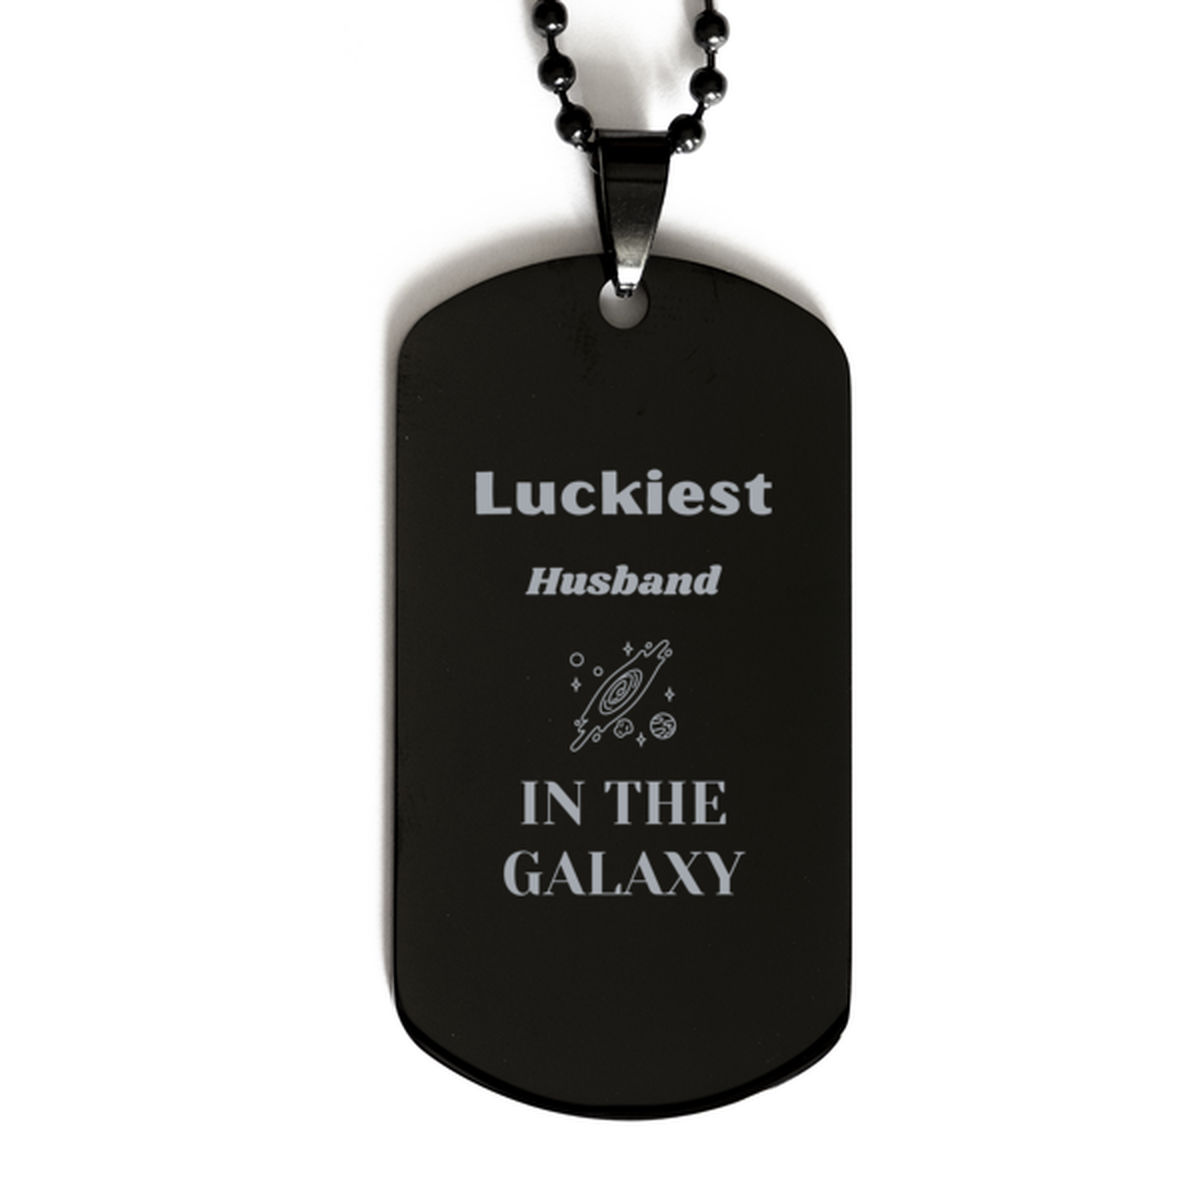 Luckiest Husband in the Galaxy, To My Husband Engraved Gifts, Christmas Husband Black Dog Tag Gifts, X-mas Birthday Unique Gifts For Husband Men Women